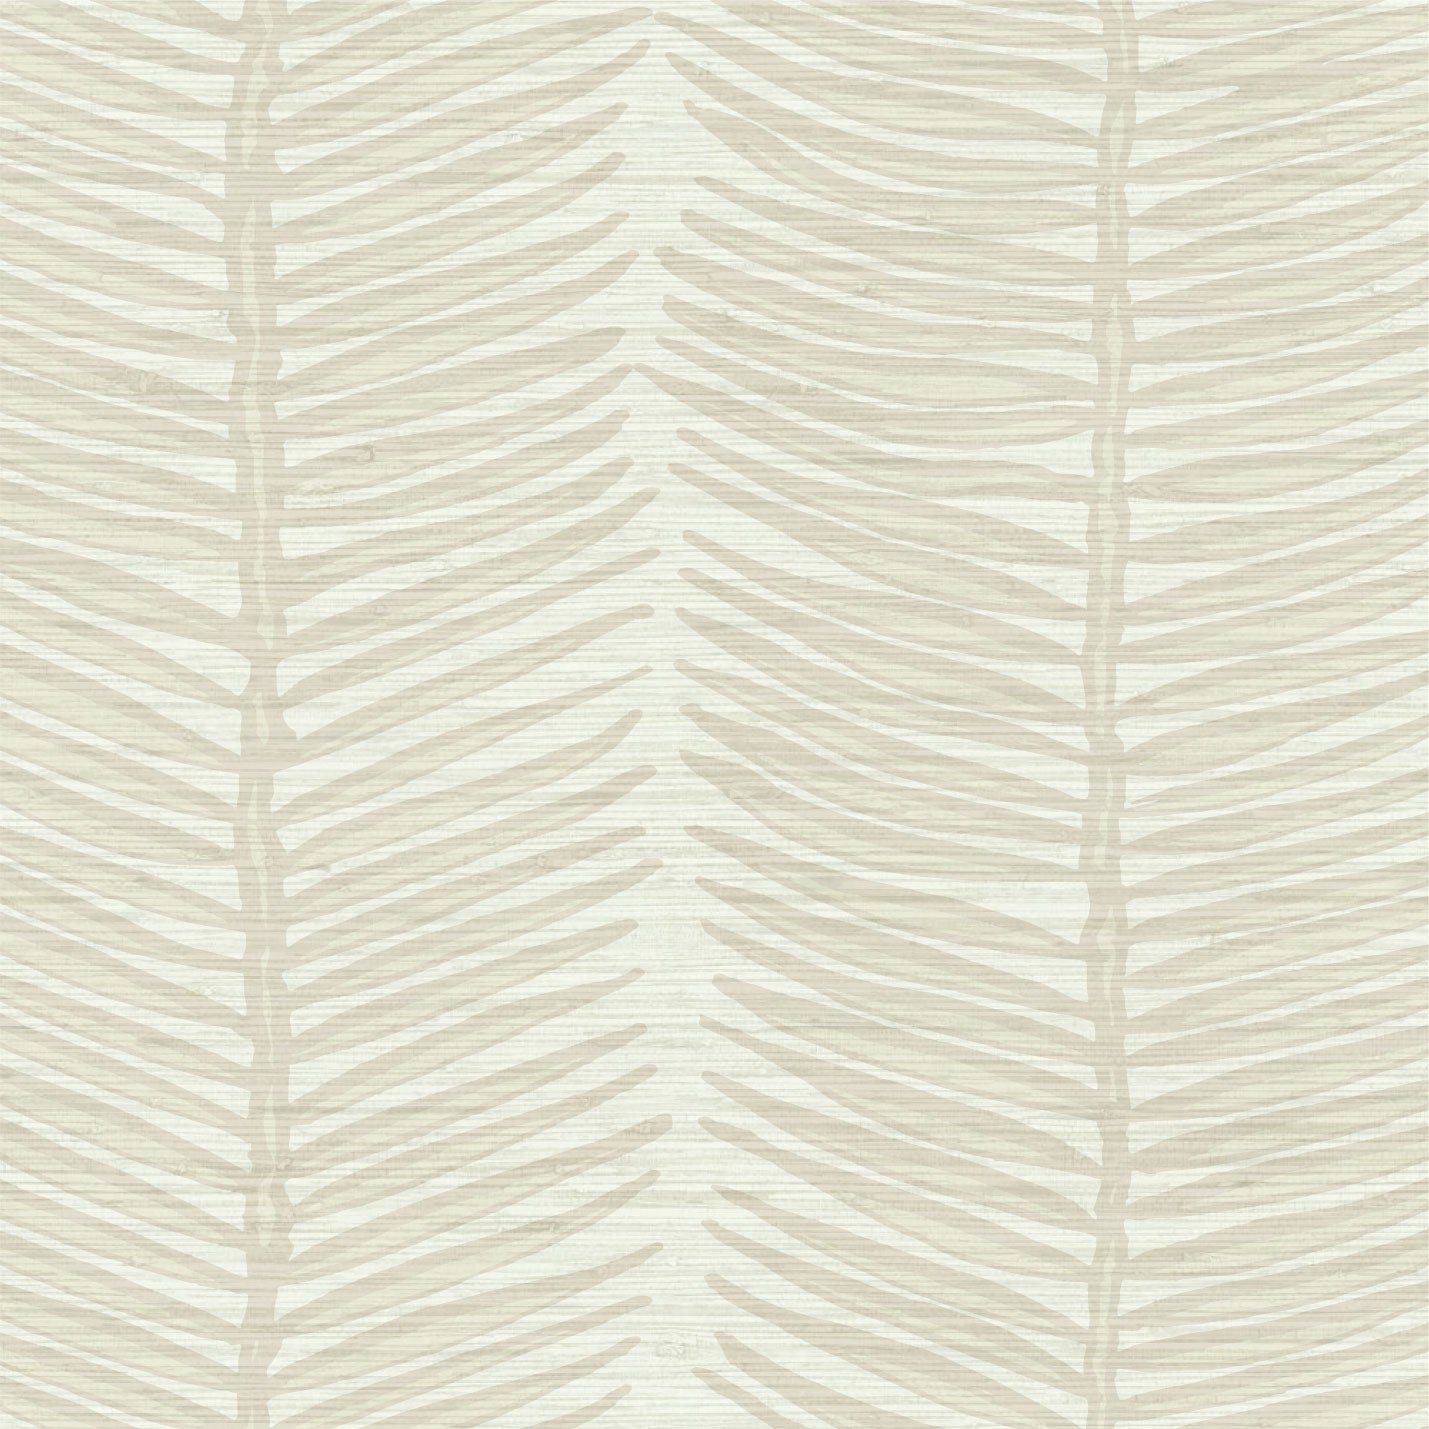 Load image into Gallery viewer, Grasscloth wallpaper Natural Textured Eco-Friendly Non-toxic High-quality Sustainable Interior Design Bold Custom Tailor-made Retro chic Tropical Jungle Coastal Garden Seaside Seashore Waterfront Vacation home styling Retreat Relaxed beach vibes Beach cottage Shoreline Oceanfront Nautical Cabana preppy palm fern leaf vertical stripe neutral tonal tan sand beige off-white white taupe
